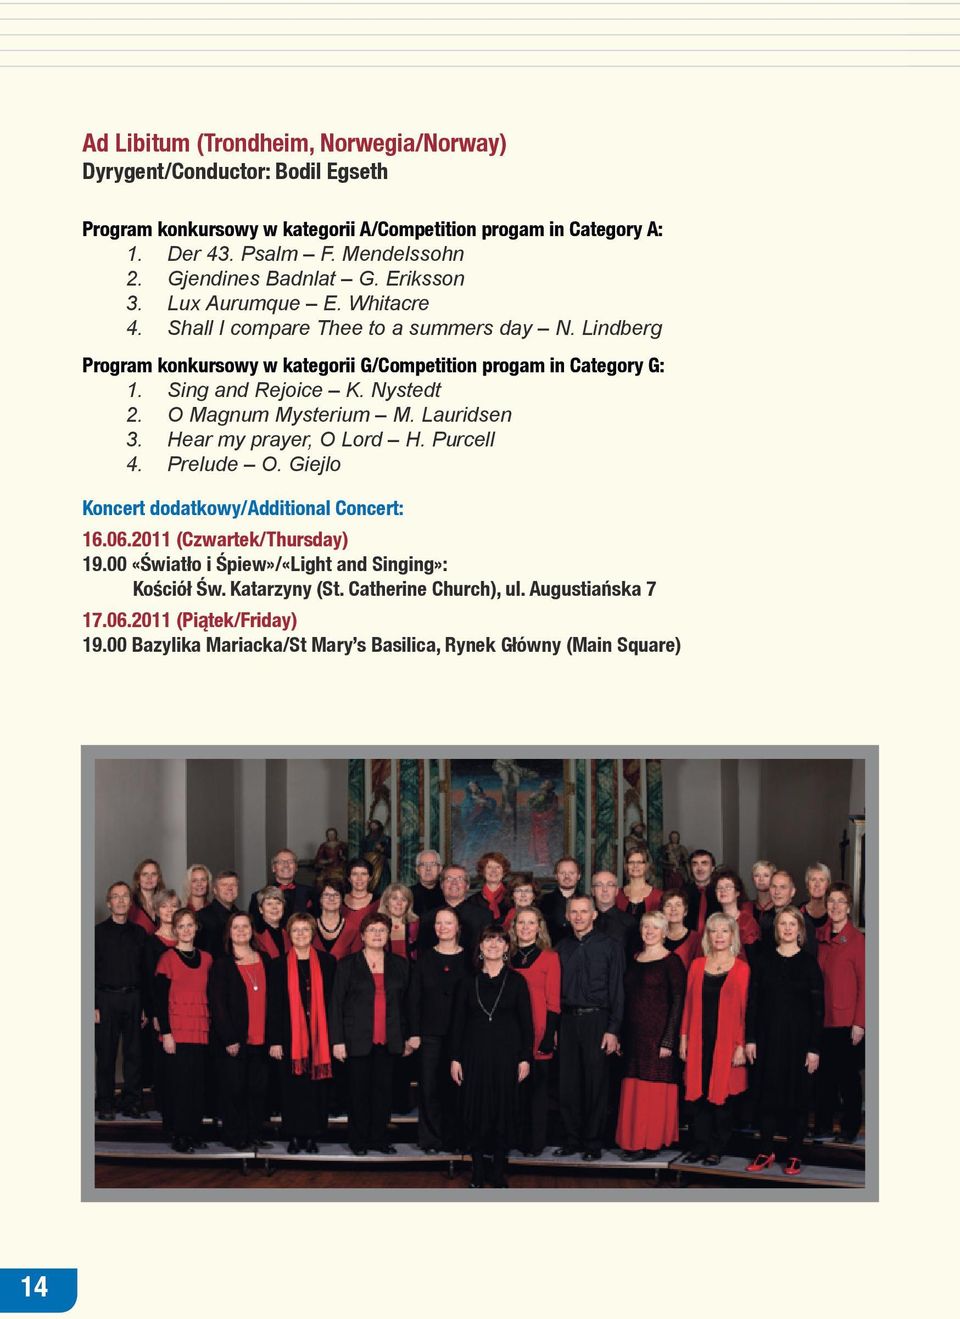 Sing and Rejoice K. Nystedt 2. O Magnum Mysterium M. Lauridsen 3. Hear my prayer, O Lord H. Purcell 4. Prelude O. Giejlo Koncert dodatkowy/additional Concert: 16.06.